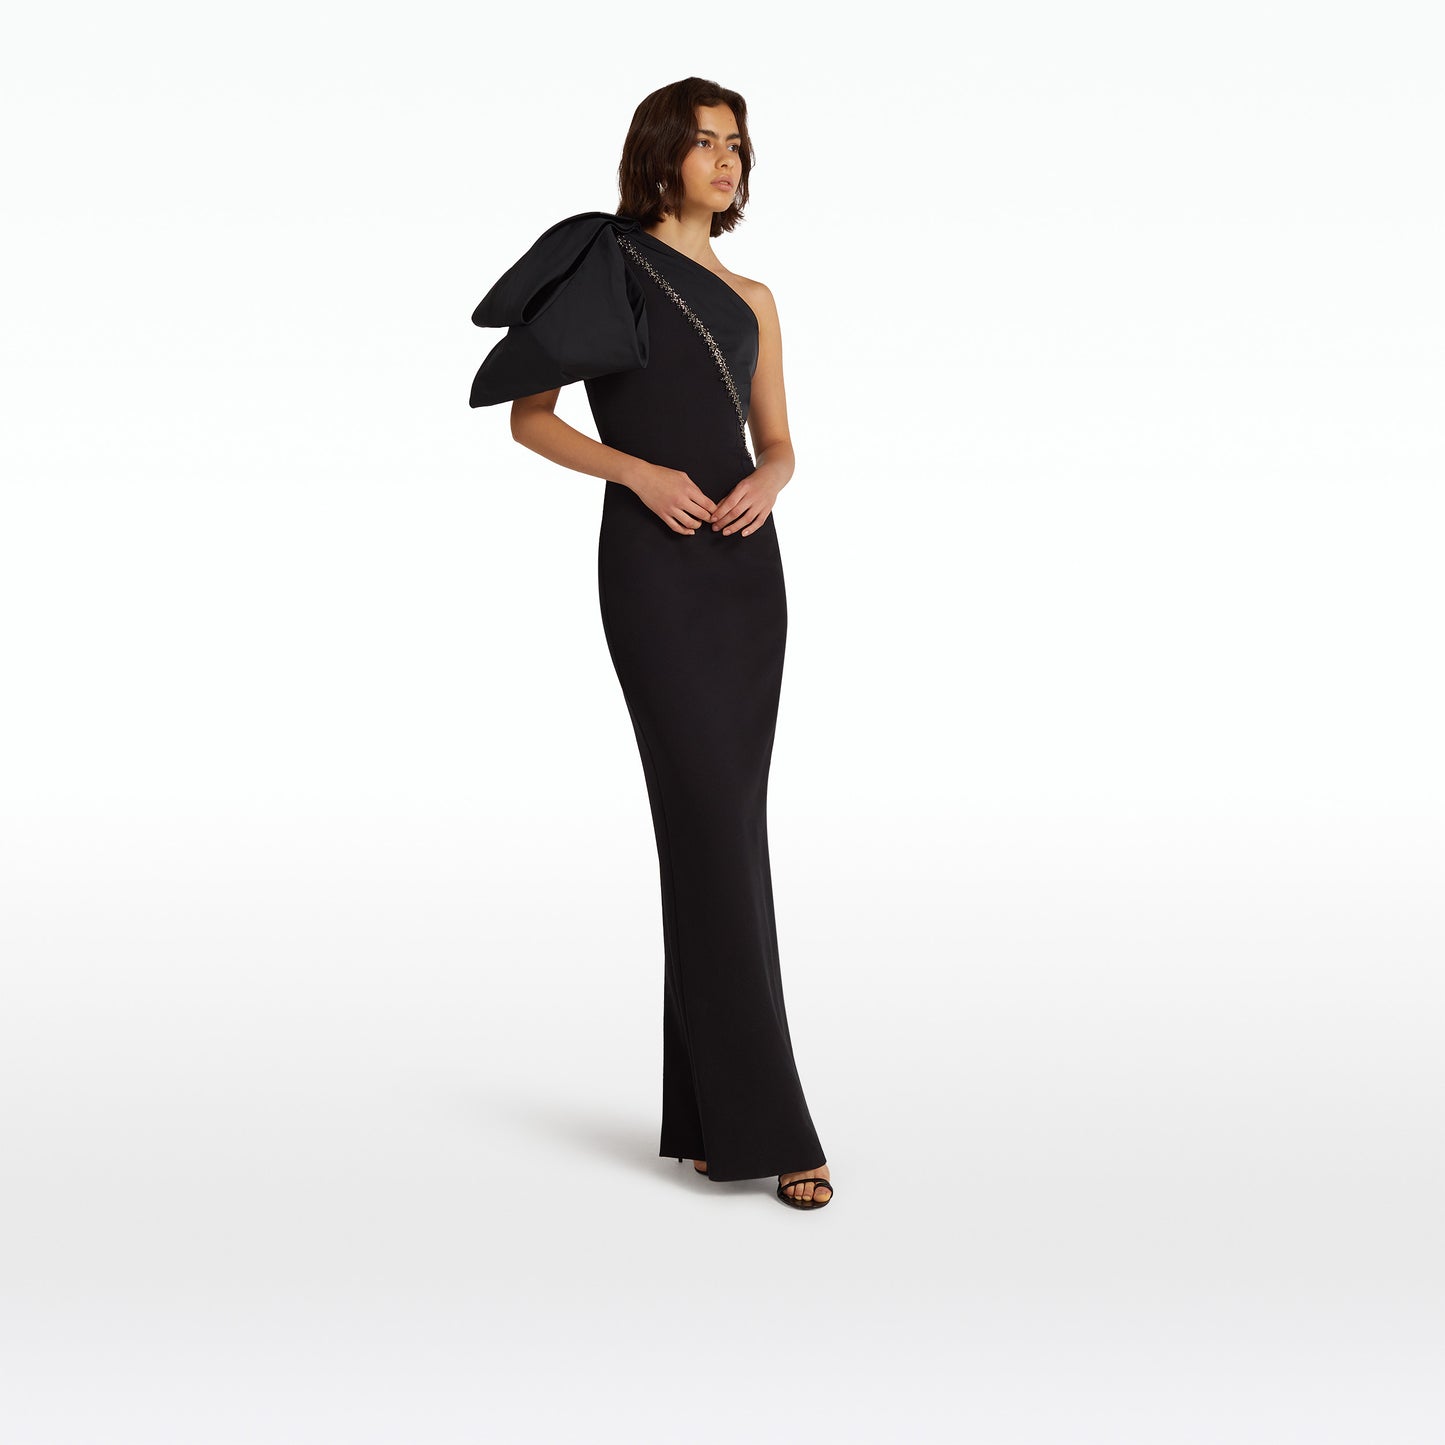 Maelys Embroidered Black Long Dress